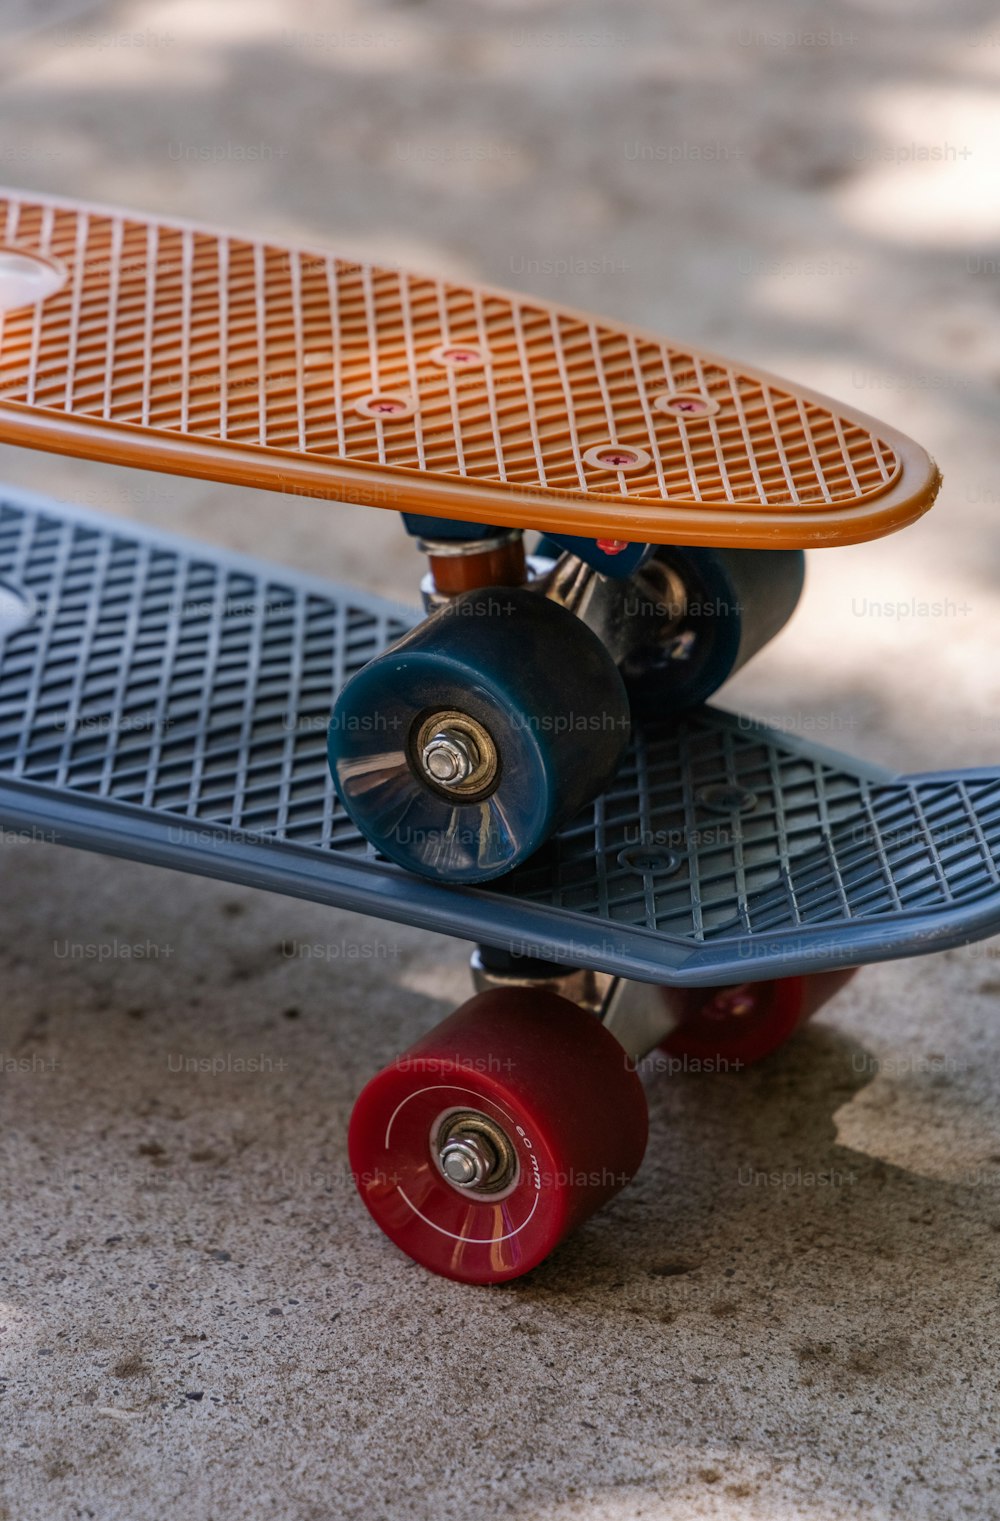 Skaters Pictures  Download Free Images on Unsplash